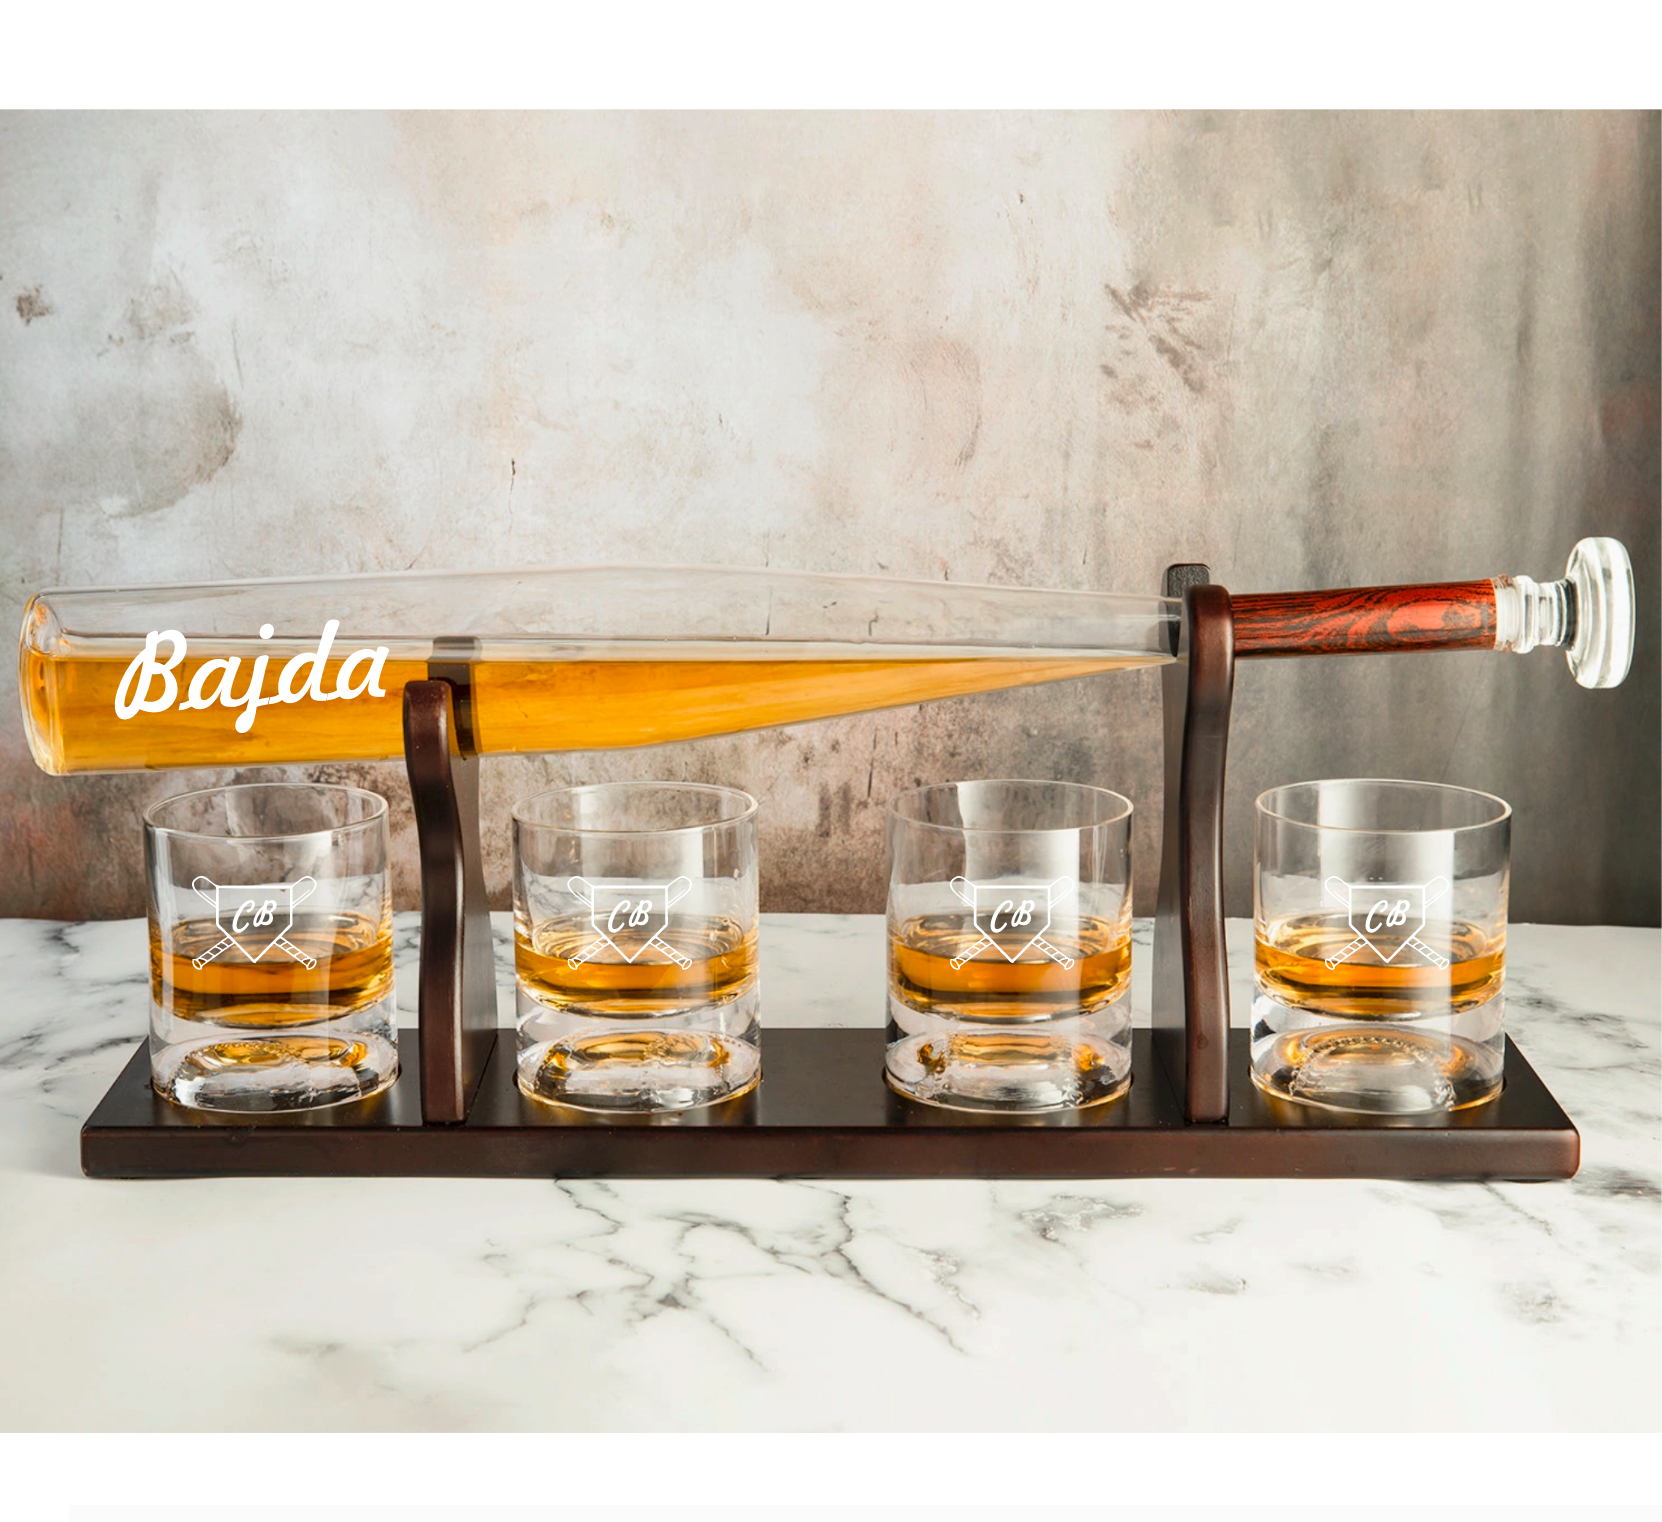 Baseball Bat Whiskey Decanter Set Personalized with Name and Initials